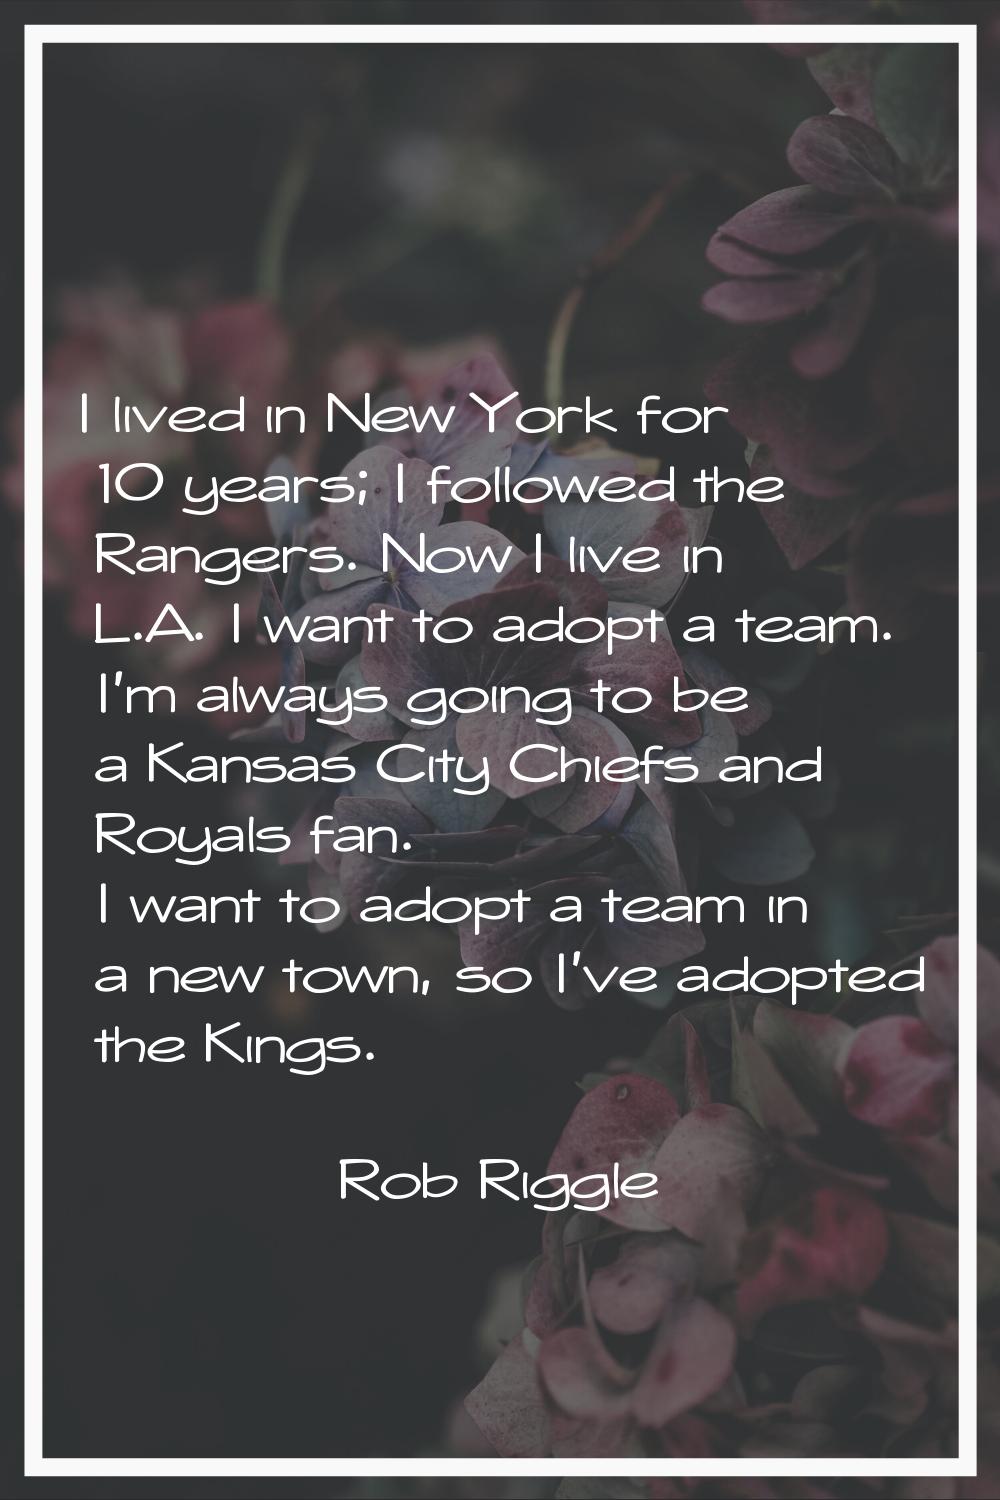 I lived in New York for 10 years; I followed the Rangers. Now I live in L.A. I want to adopt a team